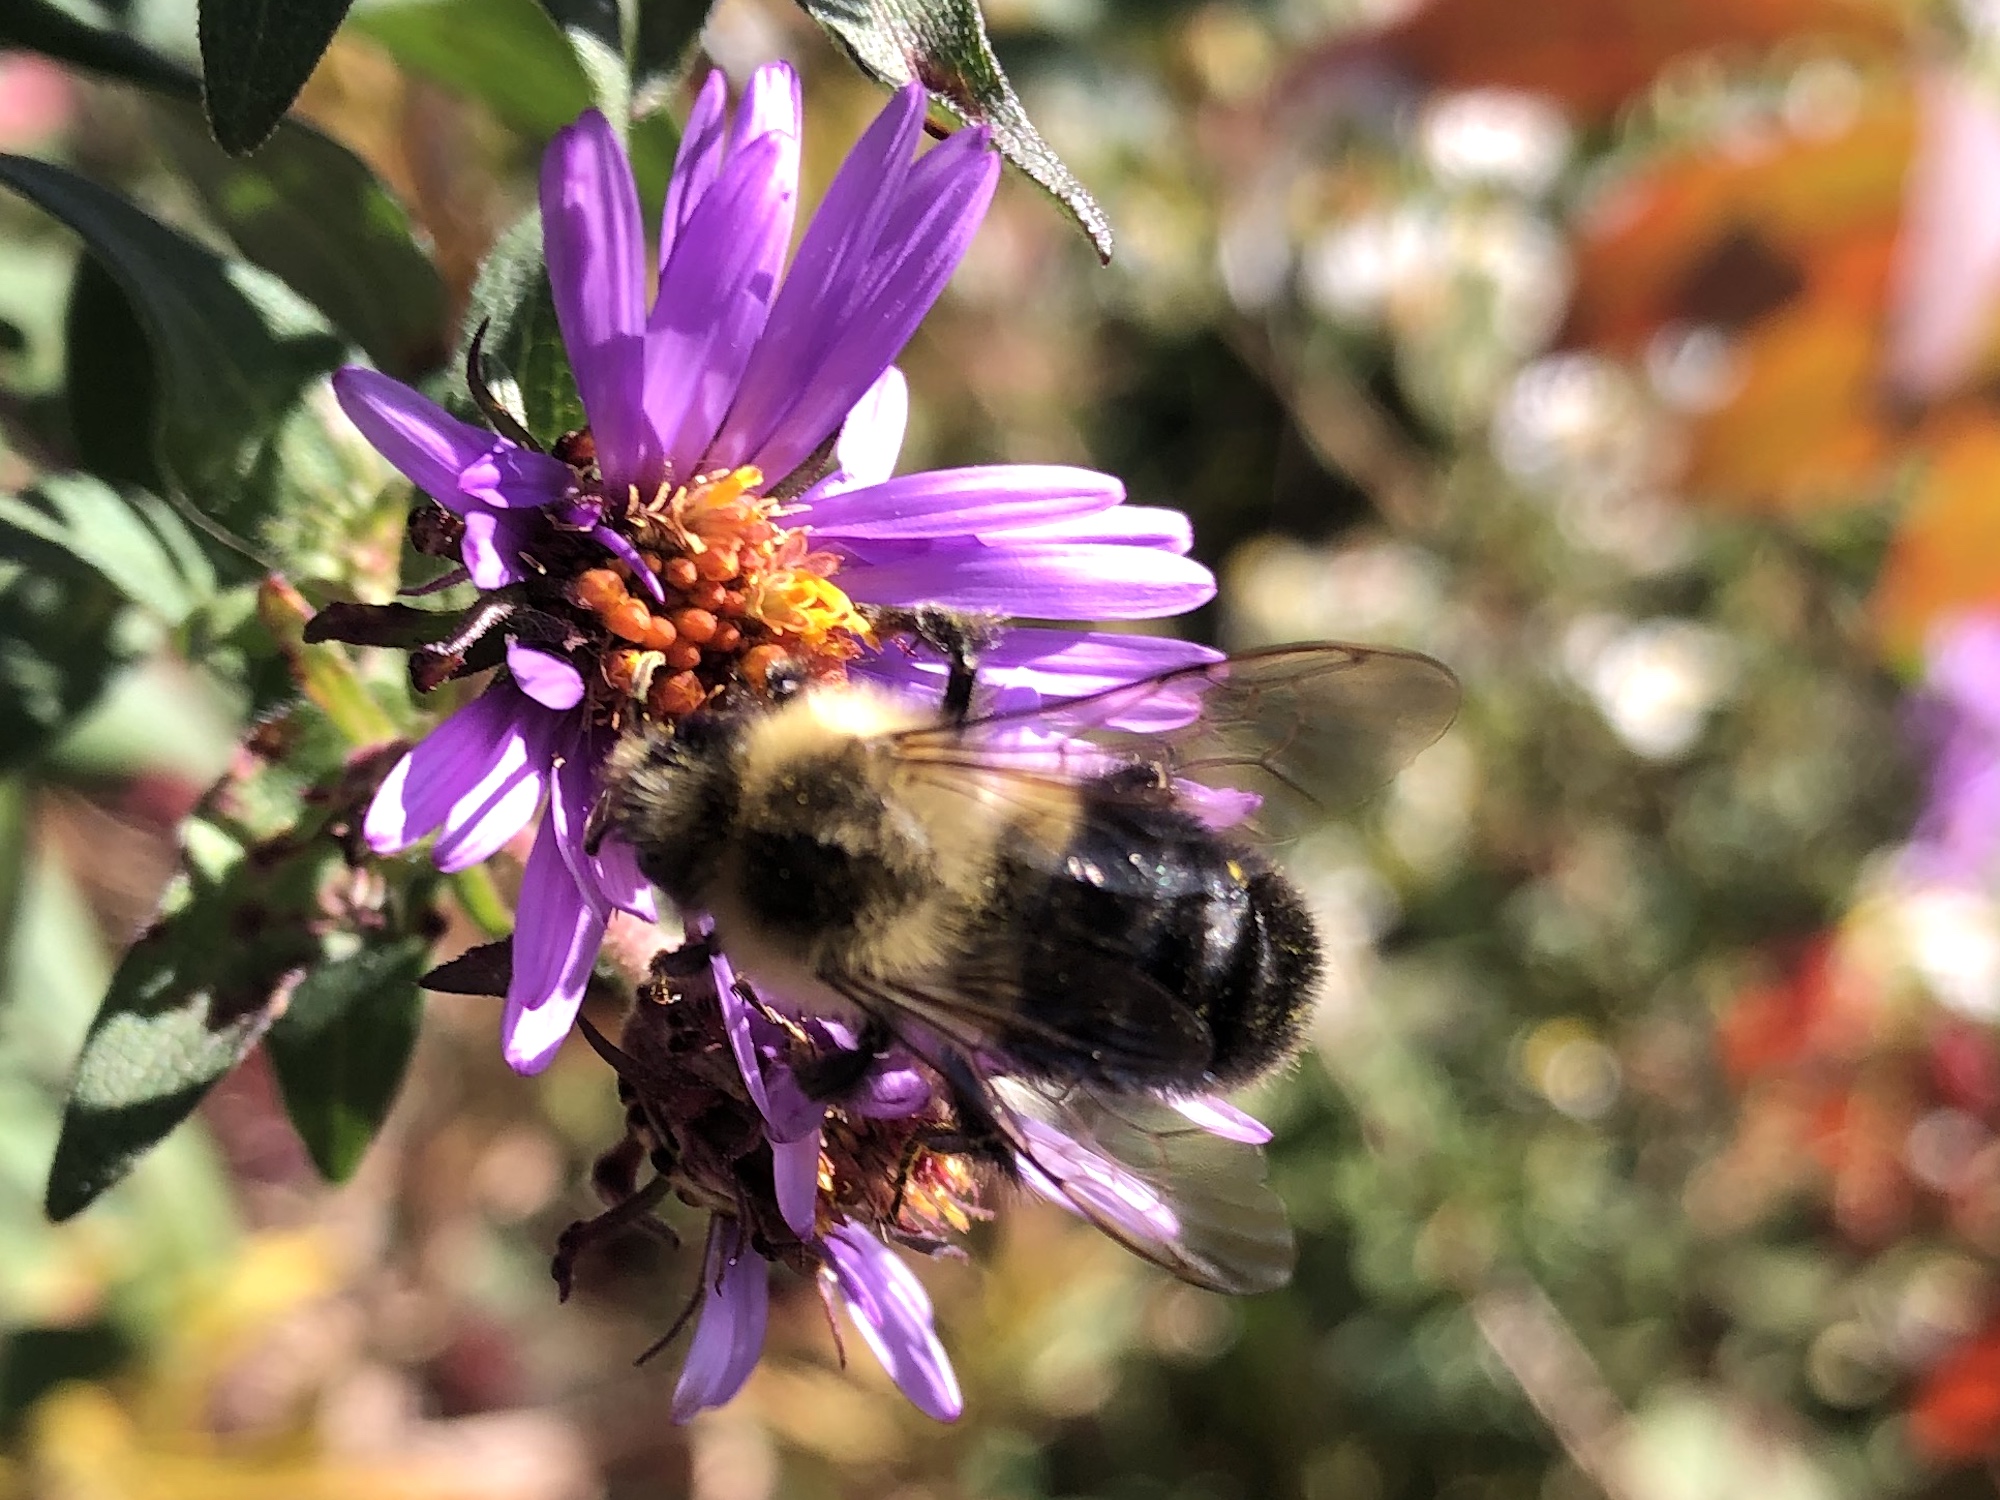 Bumblebee on aster on October 7, 2020.